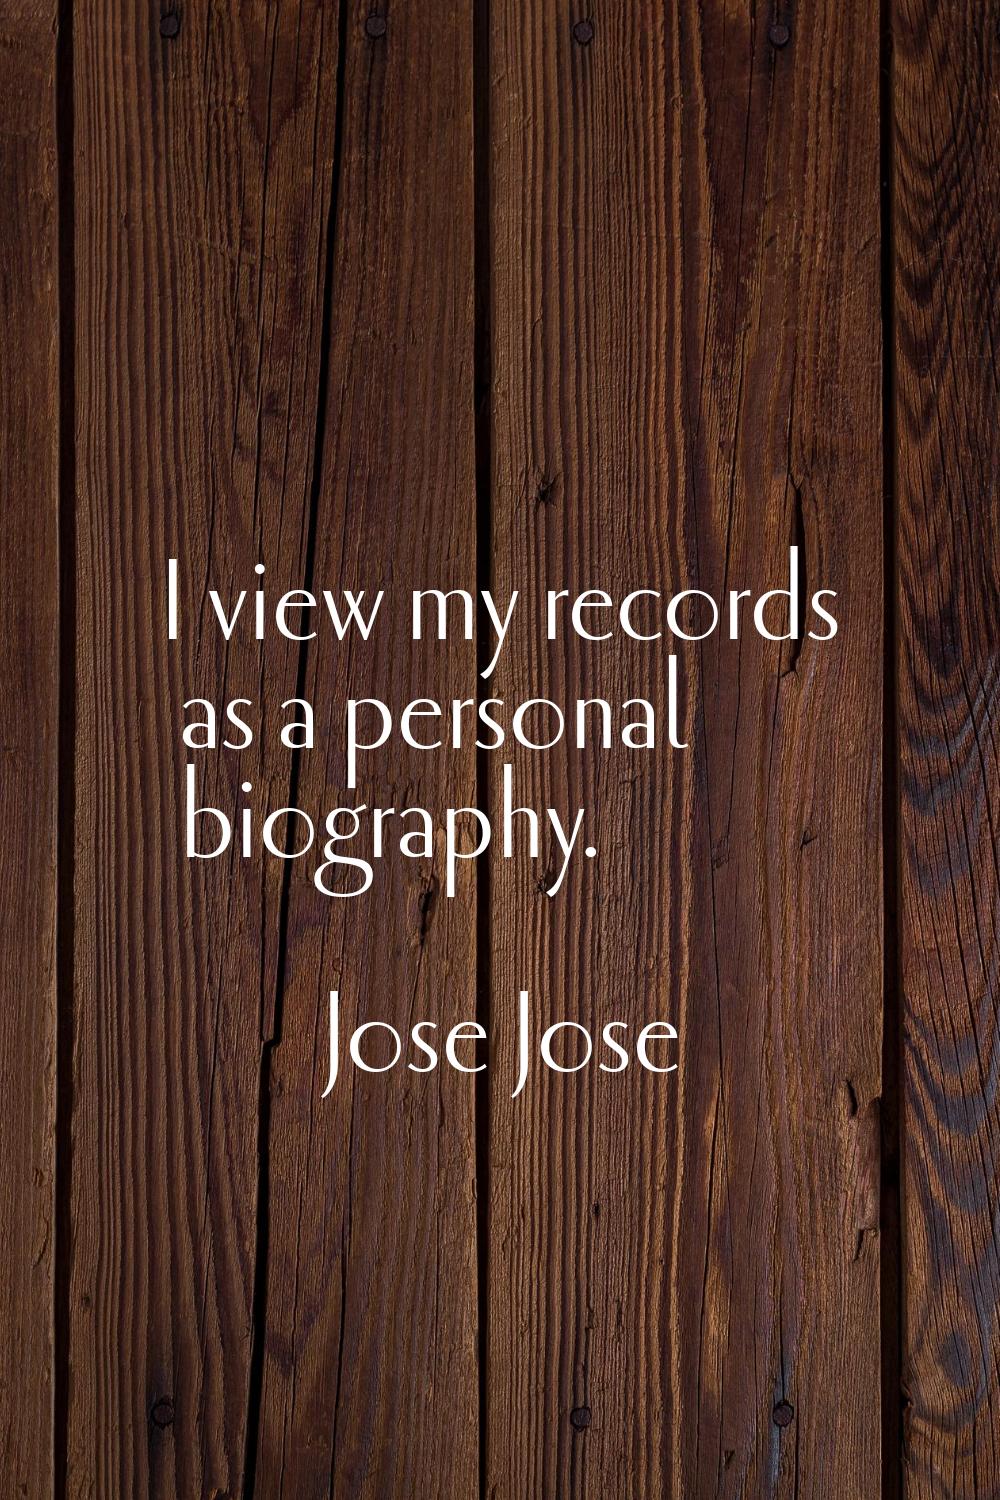 I view my records as a personal biography.